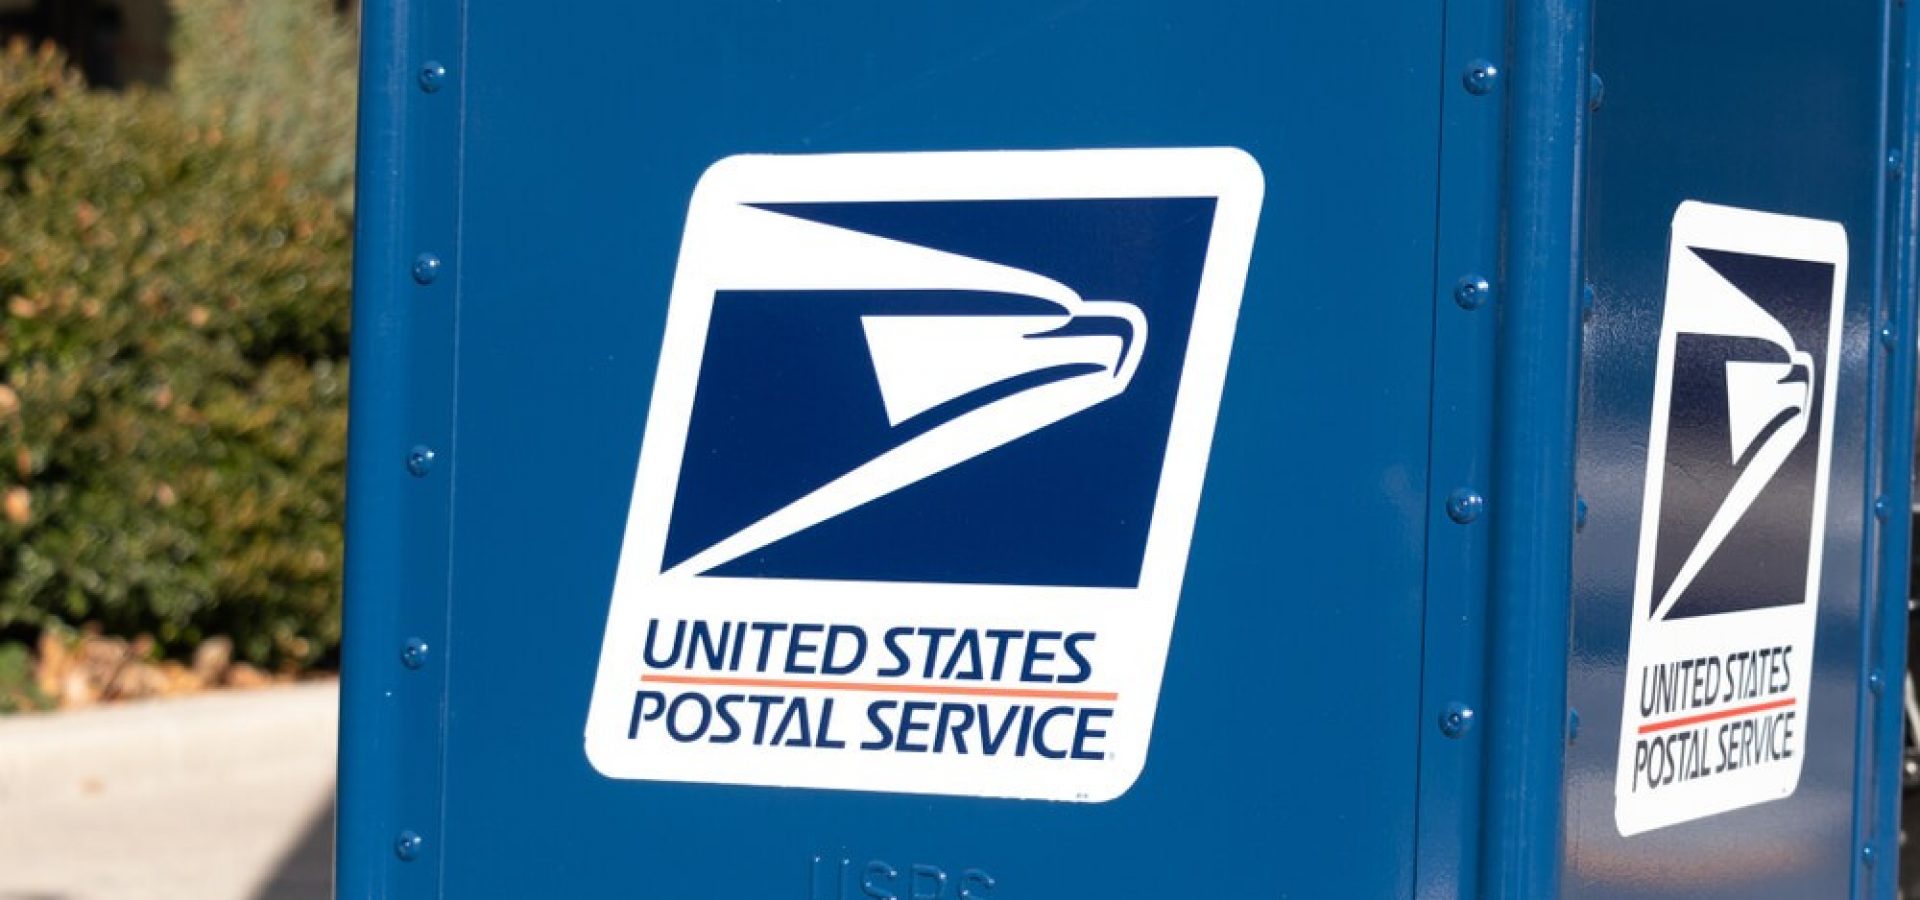 USPS logo on the side of a new drop-box.